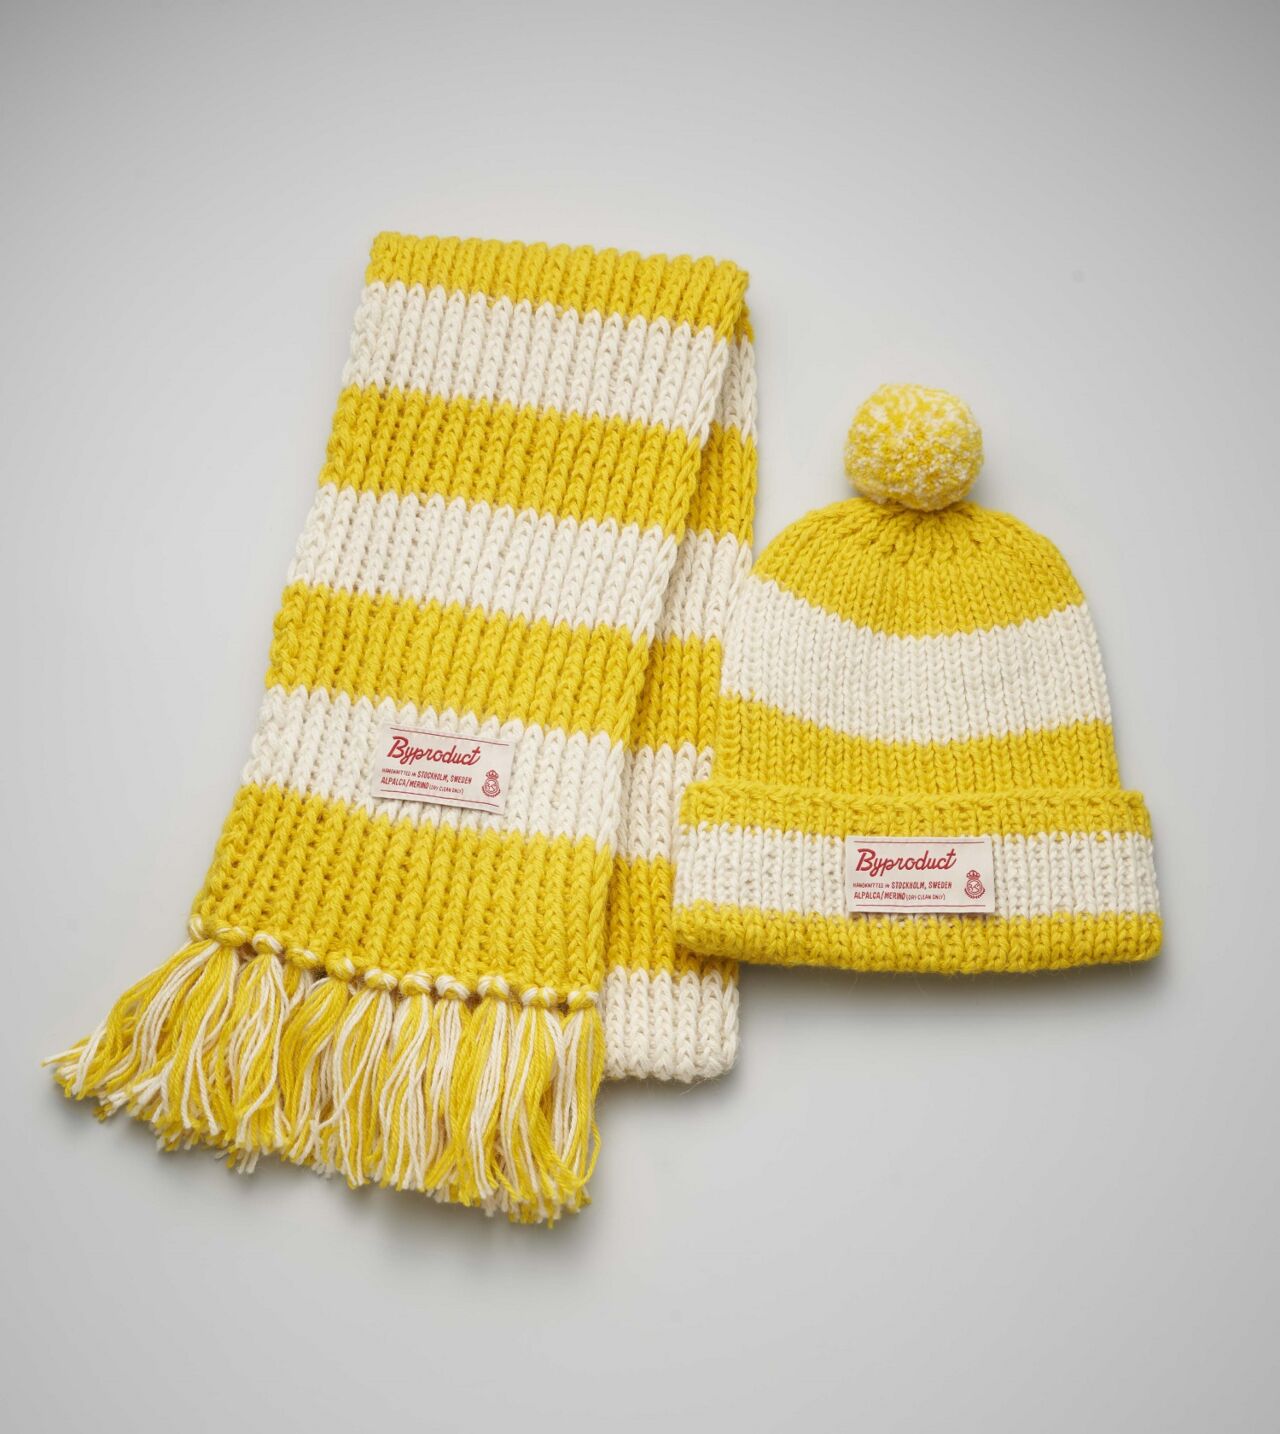 Byproduct - Set of beanie and scarf